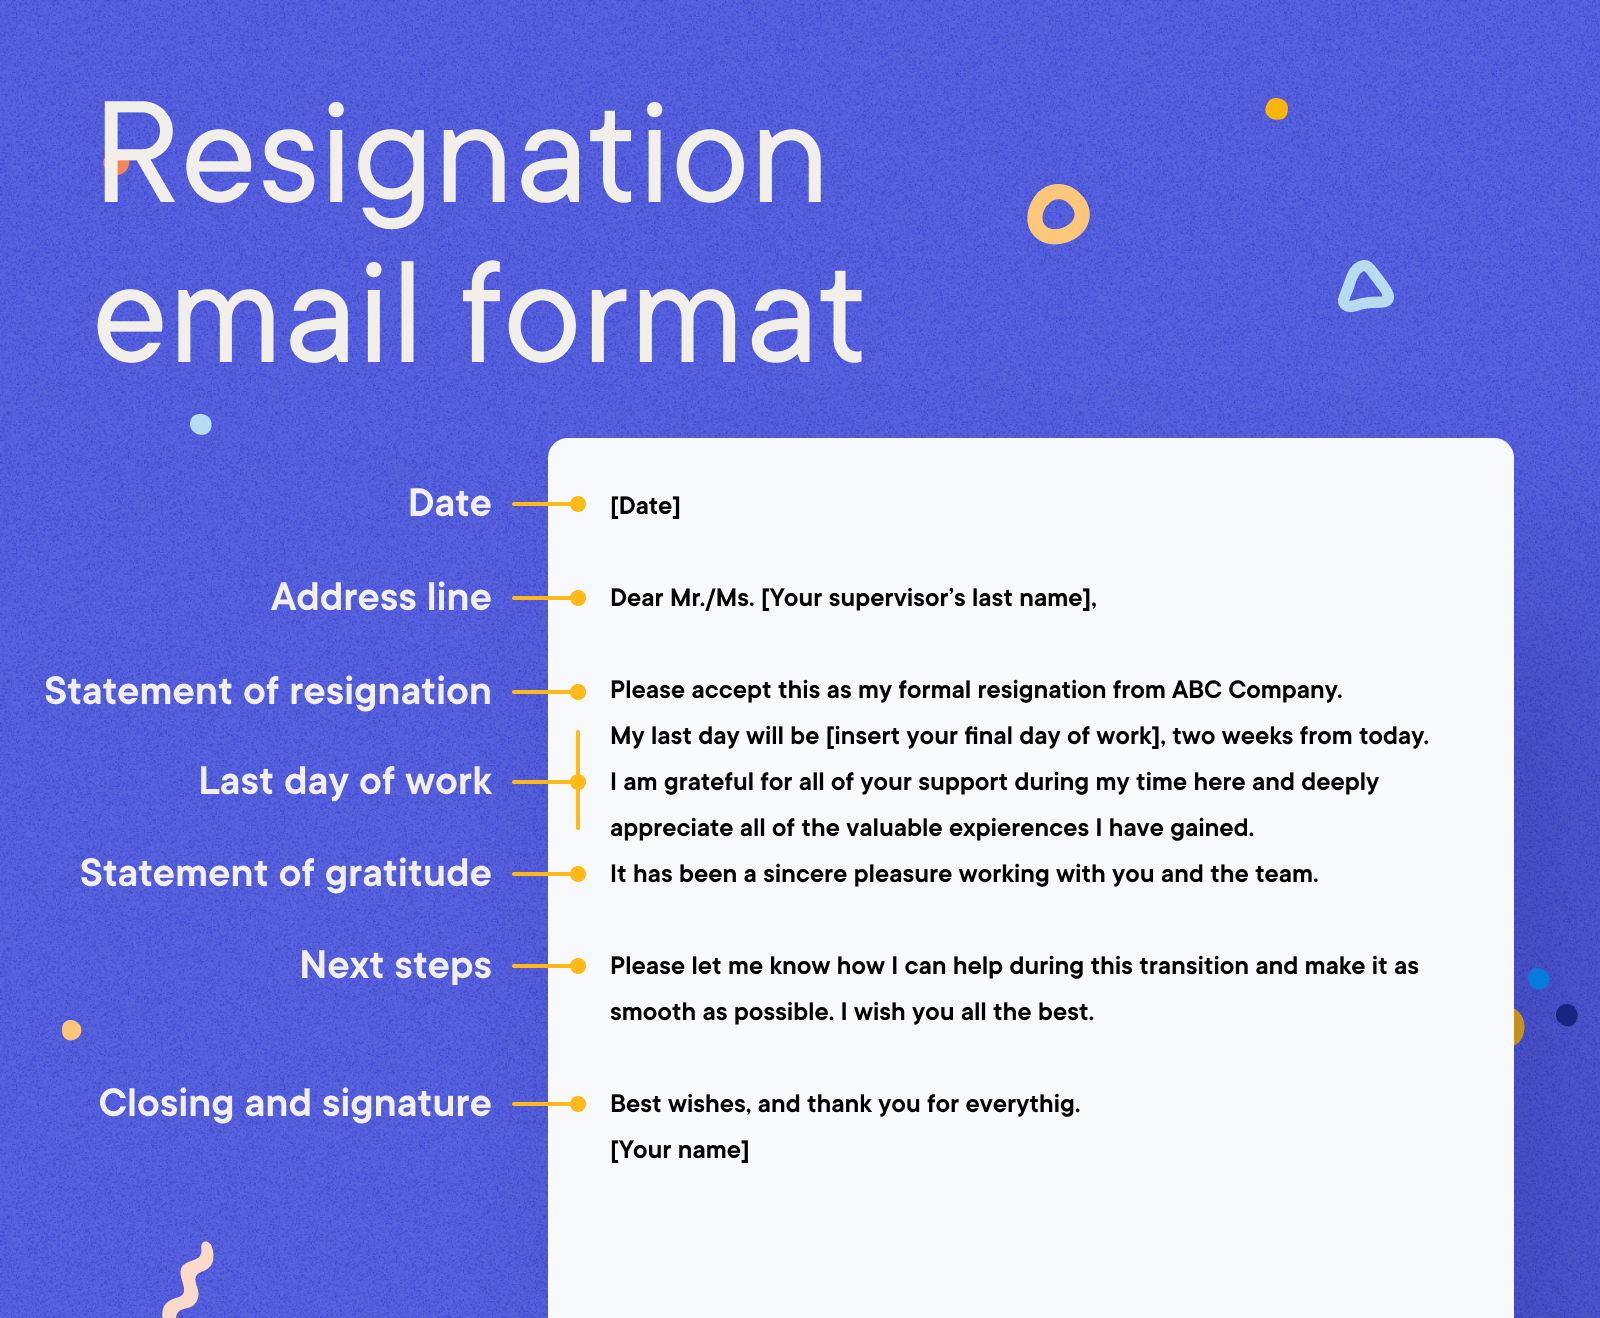 Blogs - Resignation email format